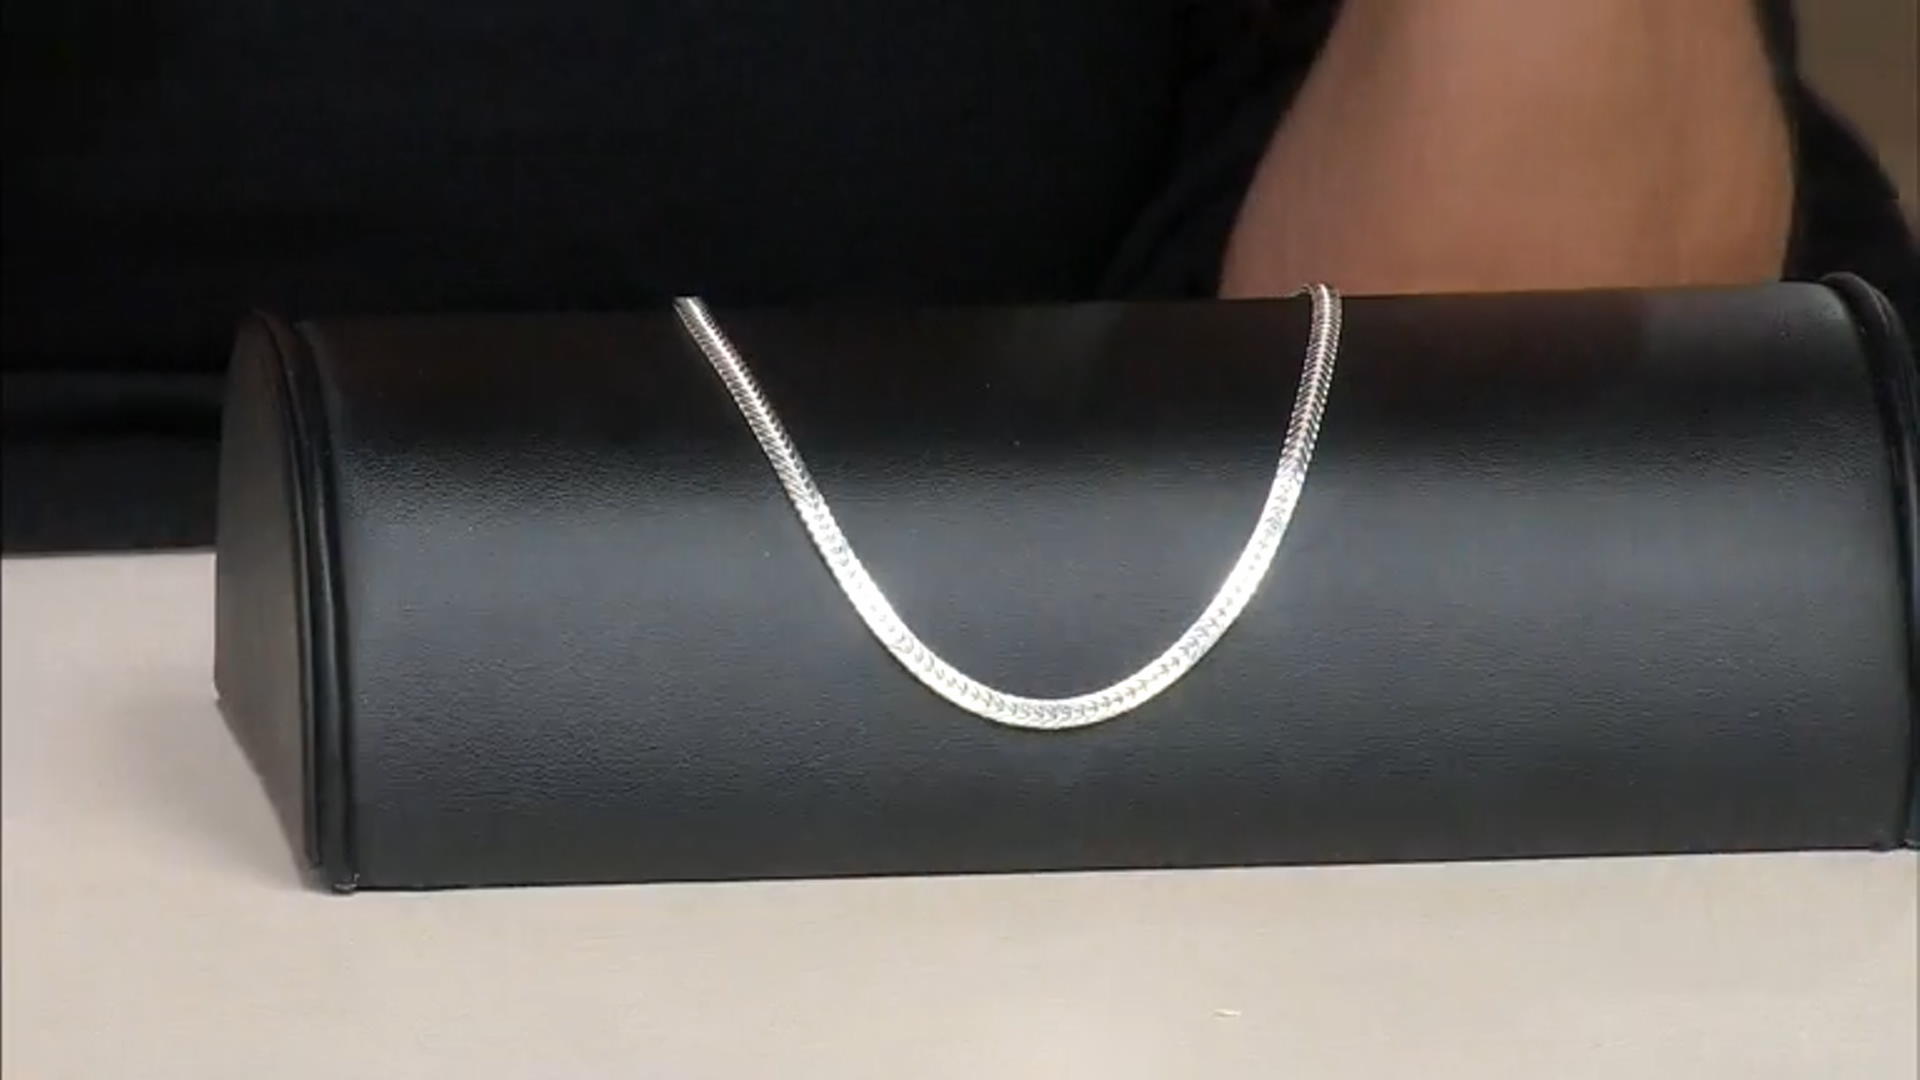 Sterling Silver Flat Diamond-Cut Foxtail Necklace Video Thumbnail